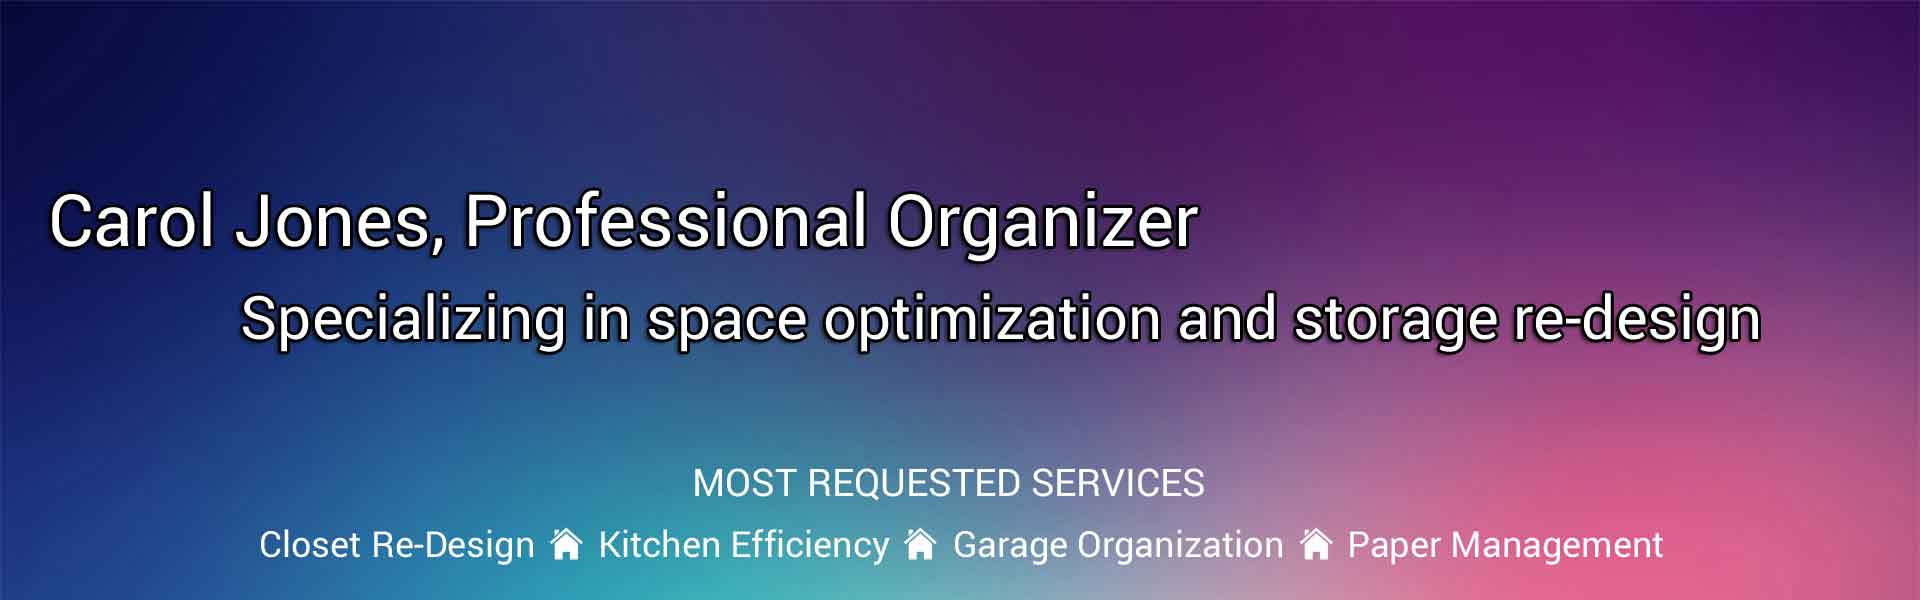 Carol Jones, Professional Organizer Residential organizing and space design for your home